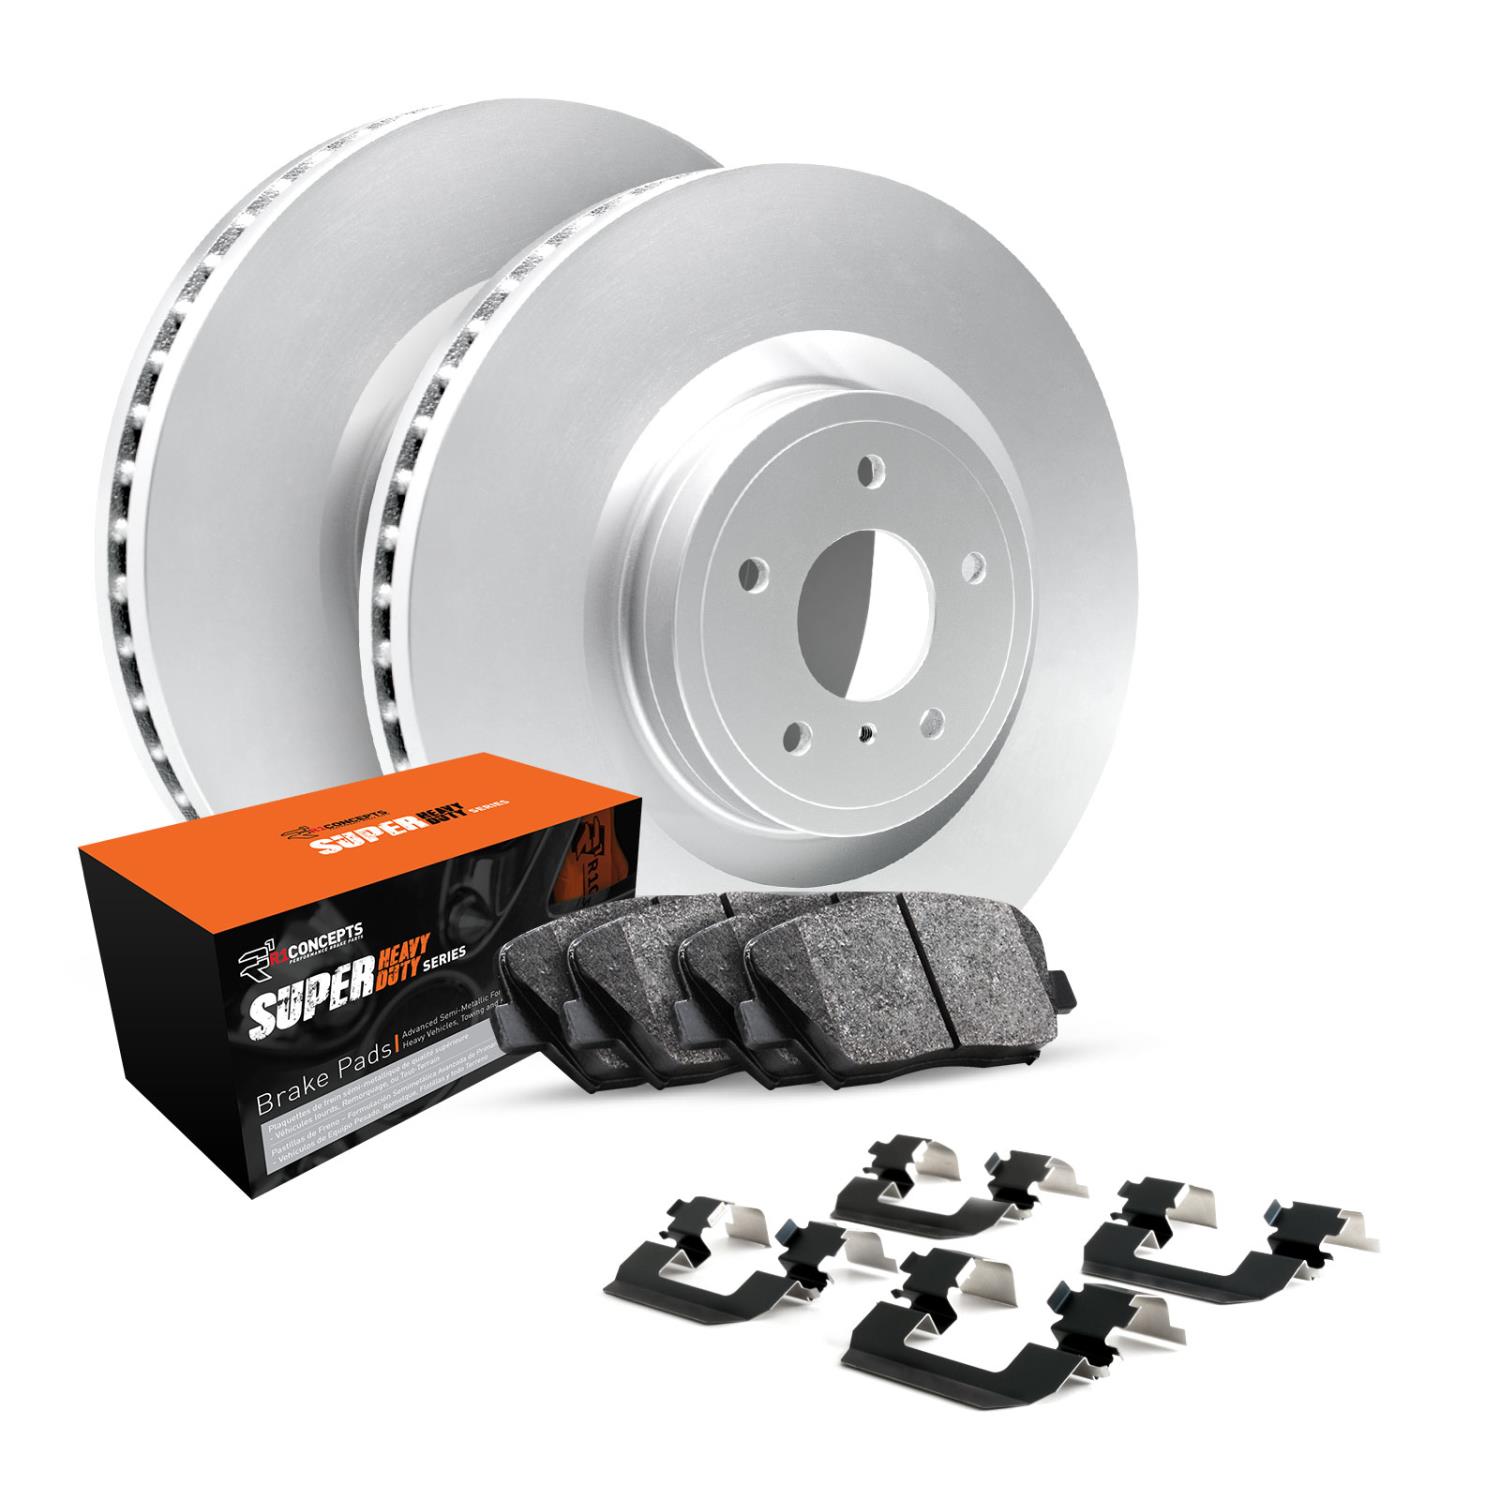 GEO-Carbon Brake Rotor Set w/Super-Duty Pads & Hardware, Fits Select Mercedes-Benz, Position: Front